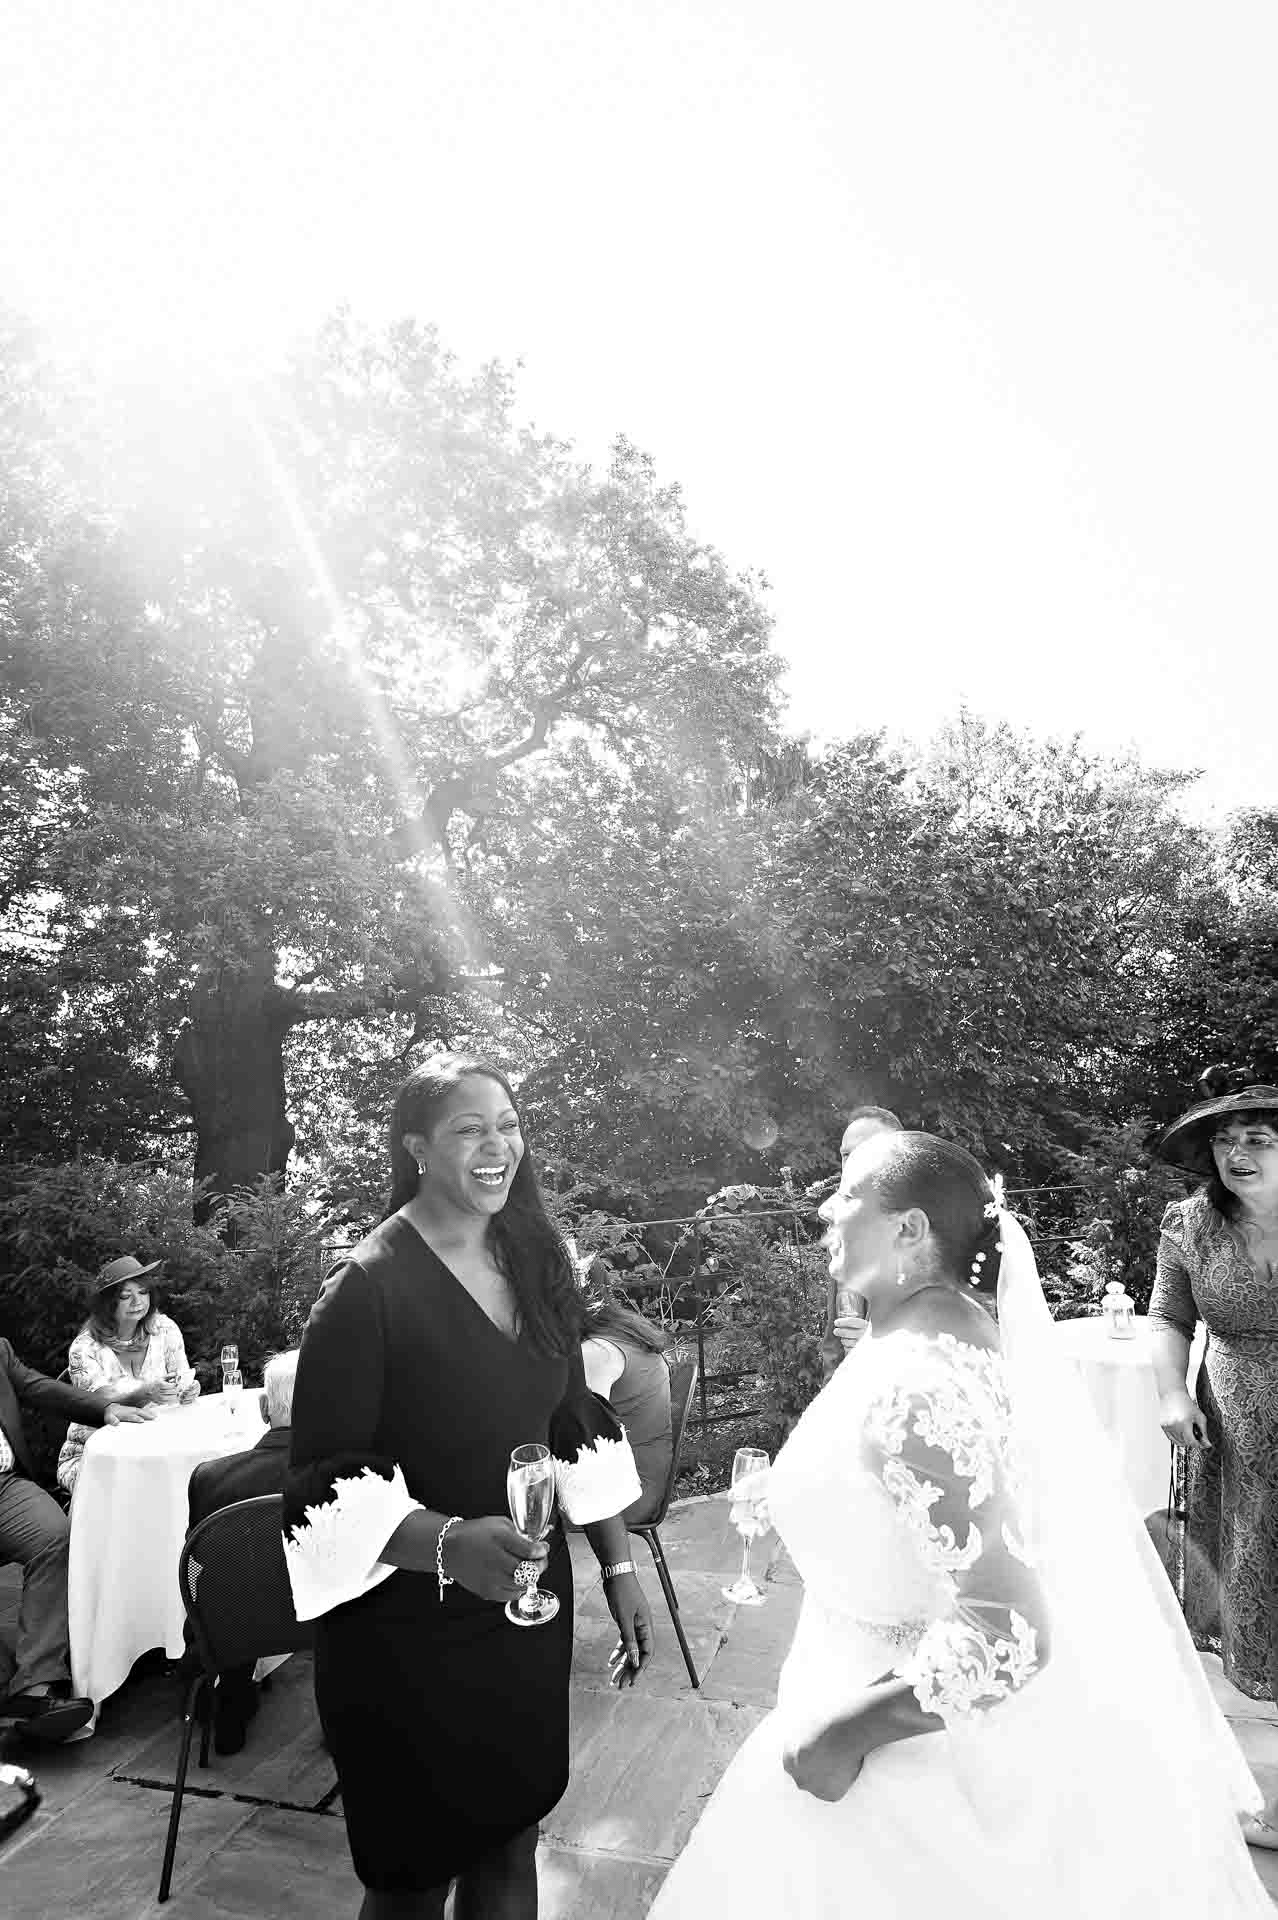 Bride talking with friend in bright sunlight at reception outside Pembroke Lodge